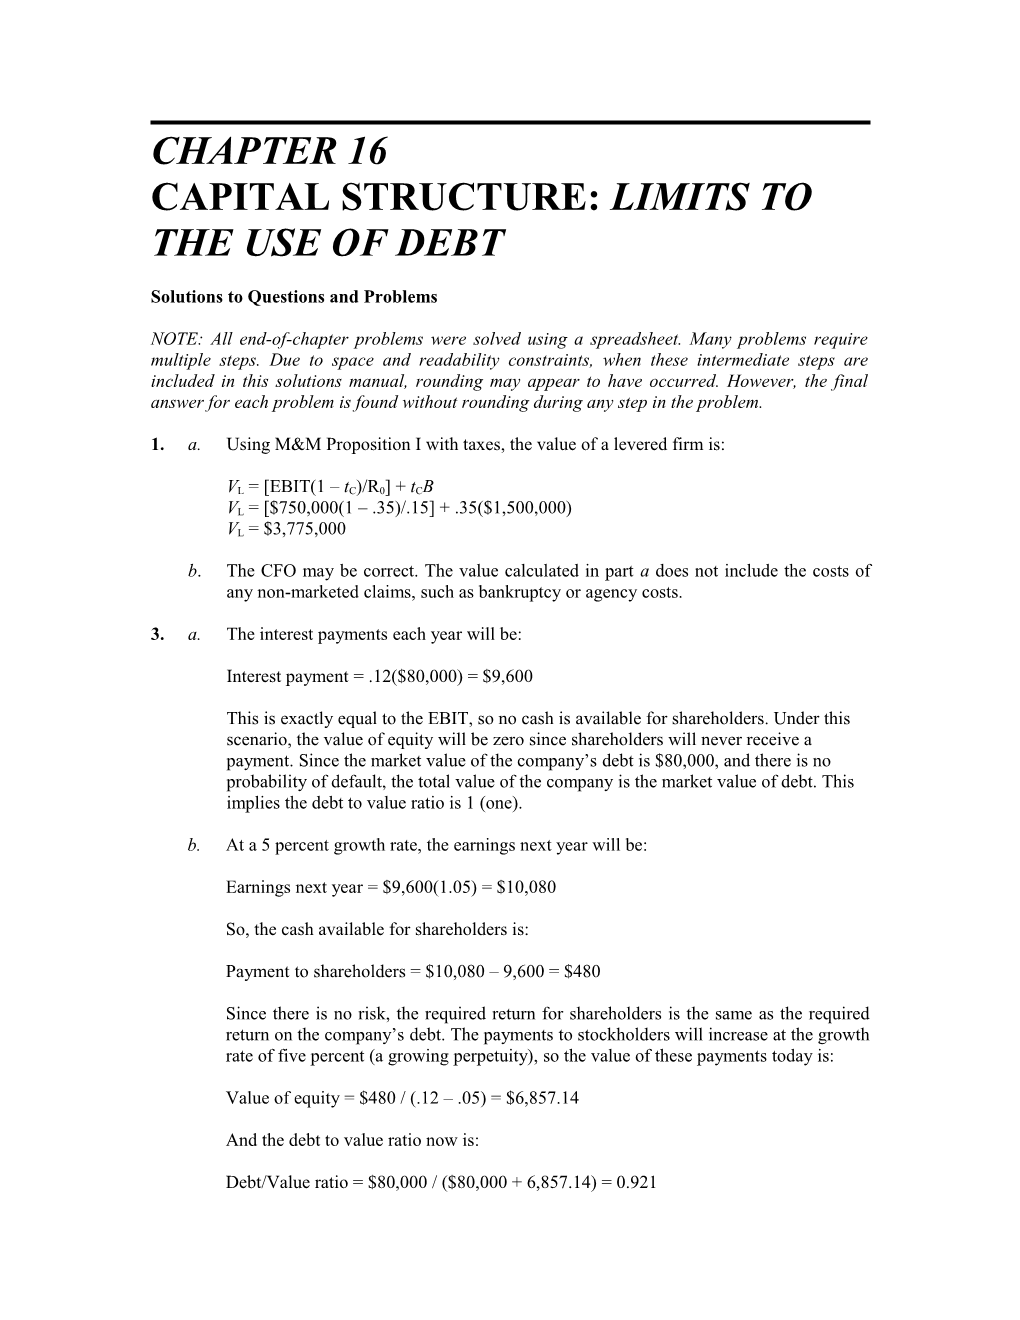 Capital Structure: Limits to the Use of Debt